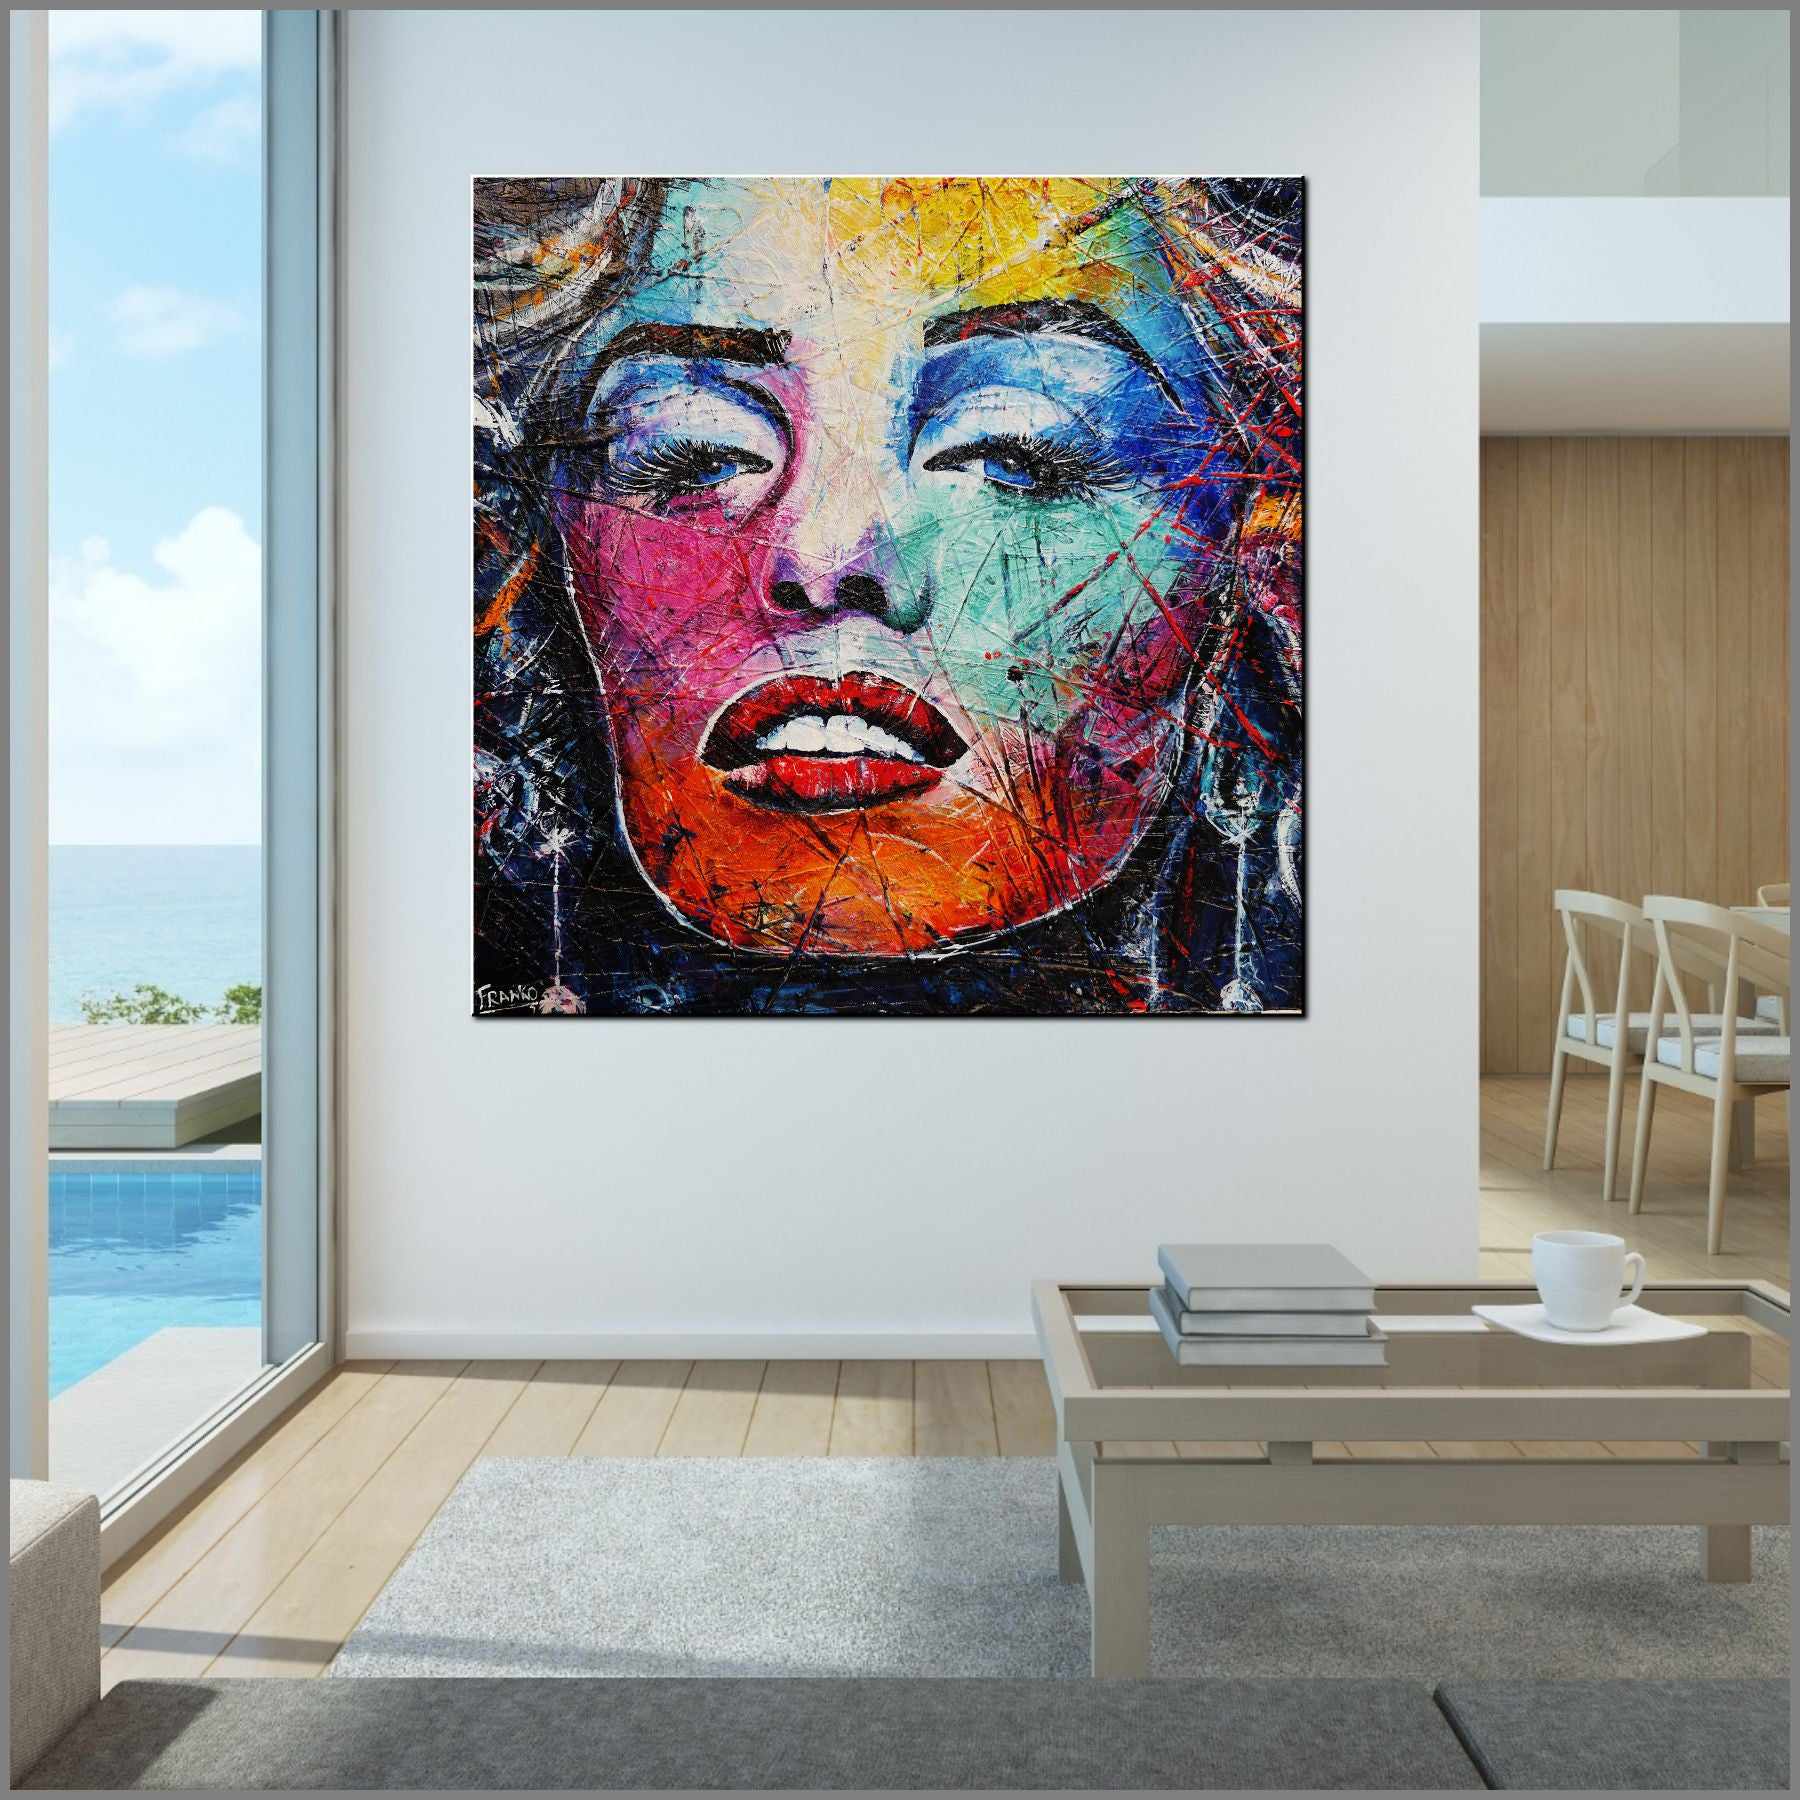 Miss M (M is for Marvelous) 120cm x 120cm Marilyn Monroe Abstract Realism Urban Pop Texture Painting (SOLD)-abstract realism-Franko-[Franko]-[huge_art]-[Australia]-Franklin Art Studio